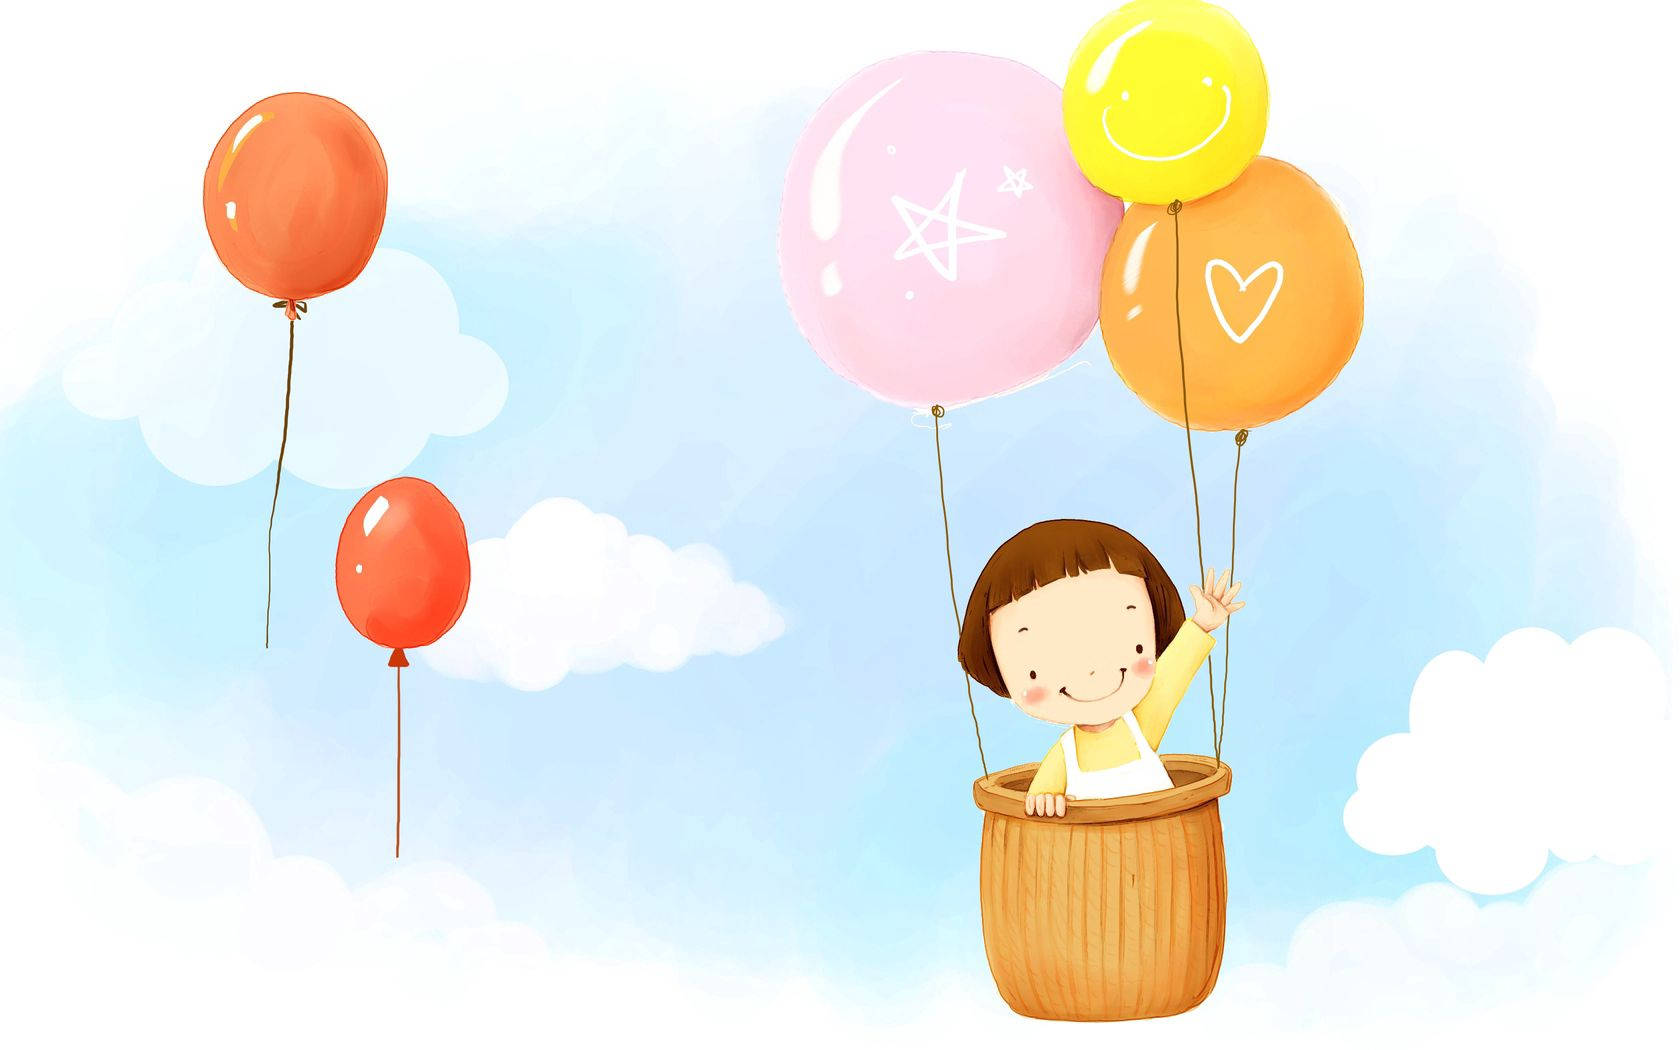 An Adorable Baby Looks With Wonder At The Colorful Balloons In The Sky Background